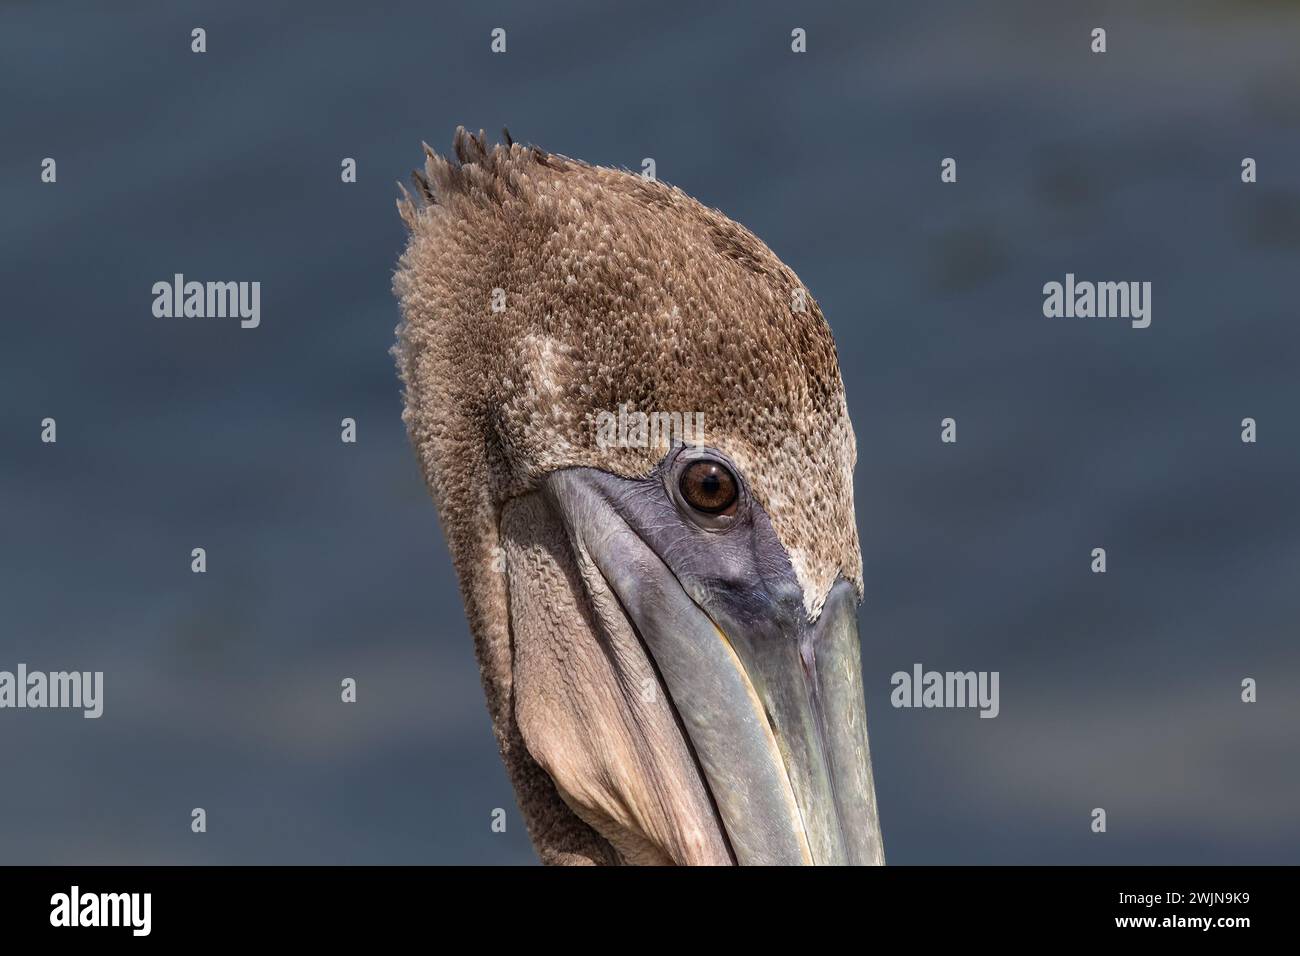 Closeup, head of Brown Pelican (Pelecanus occidentalis), on the island of Aruba. Eyes, head with feathers and bill visible. Stock Photo